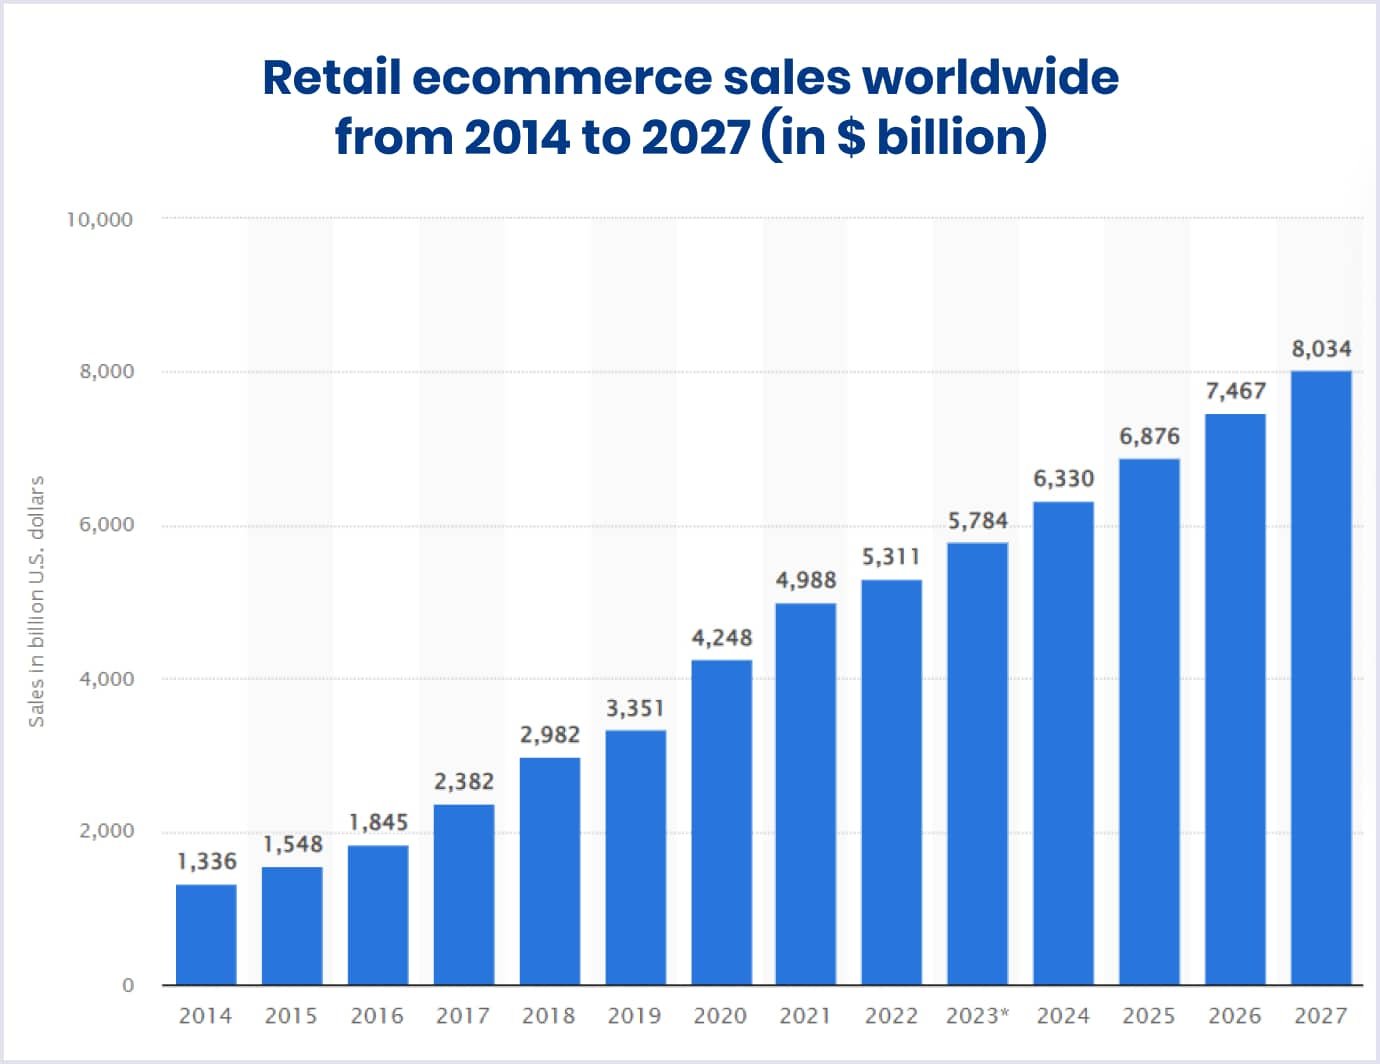 Retail ecommerce sales worldwide in 2014-2027